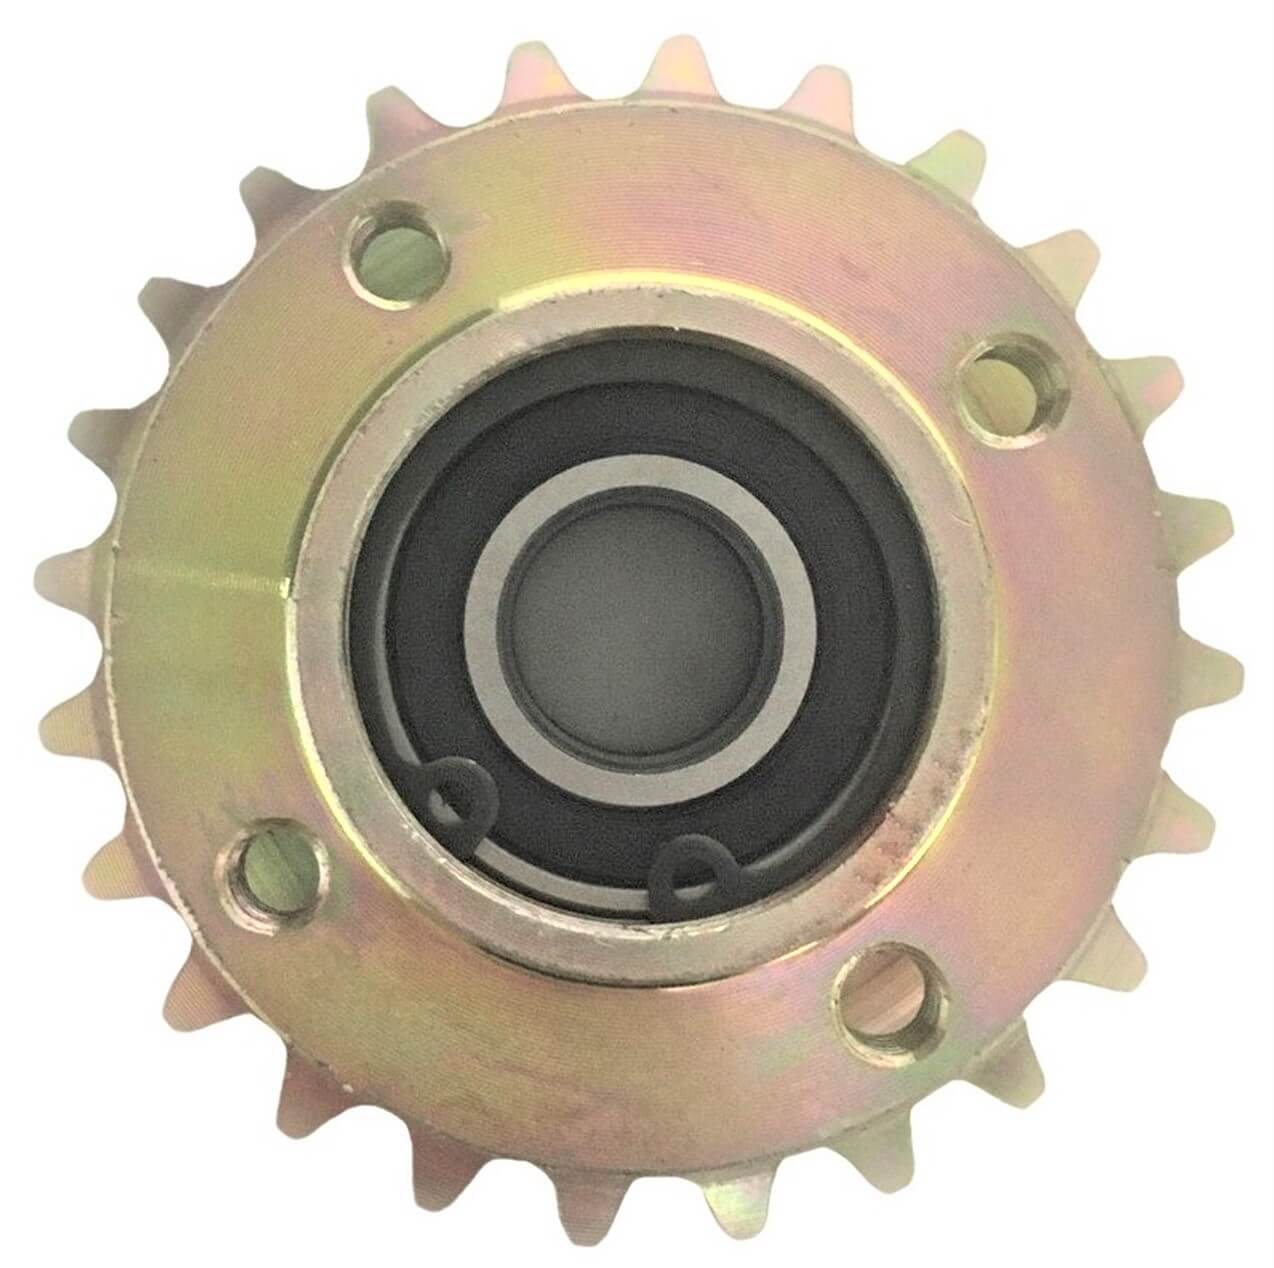 Front Sprocket #35 24TH Fits Coleman CK100, GK80, Motovox, + other small GoKarts